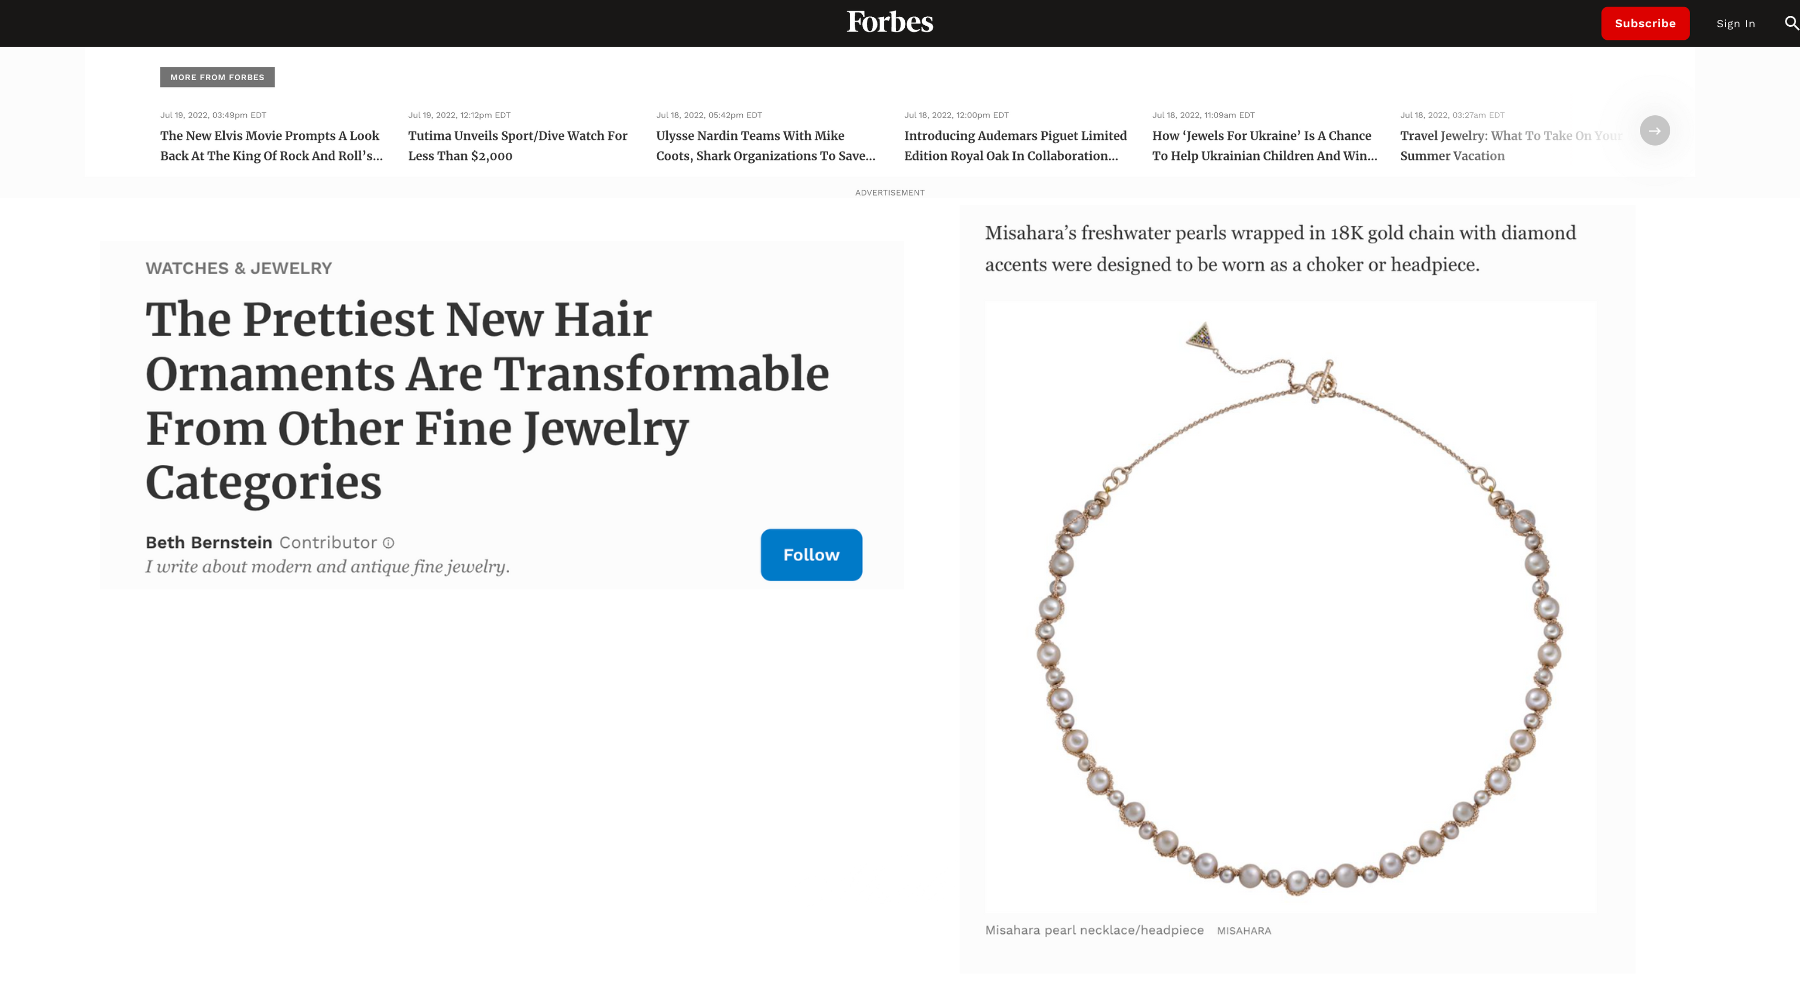 Forbes: The Prettiest Hair Ornaments 